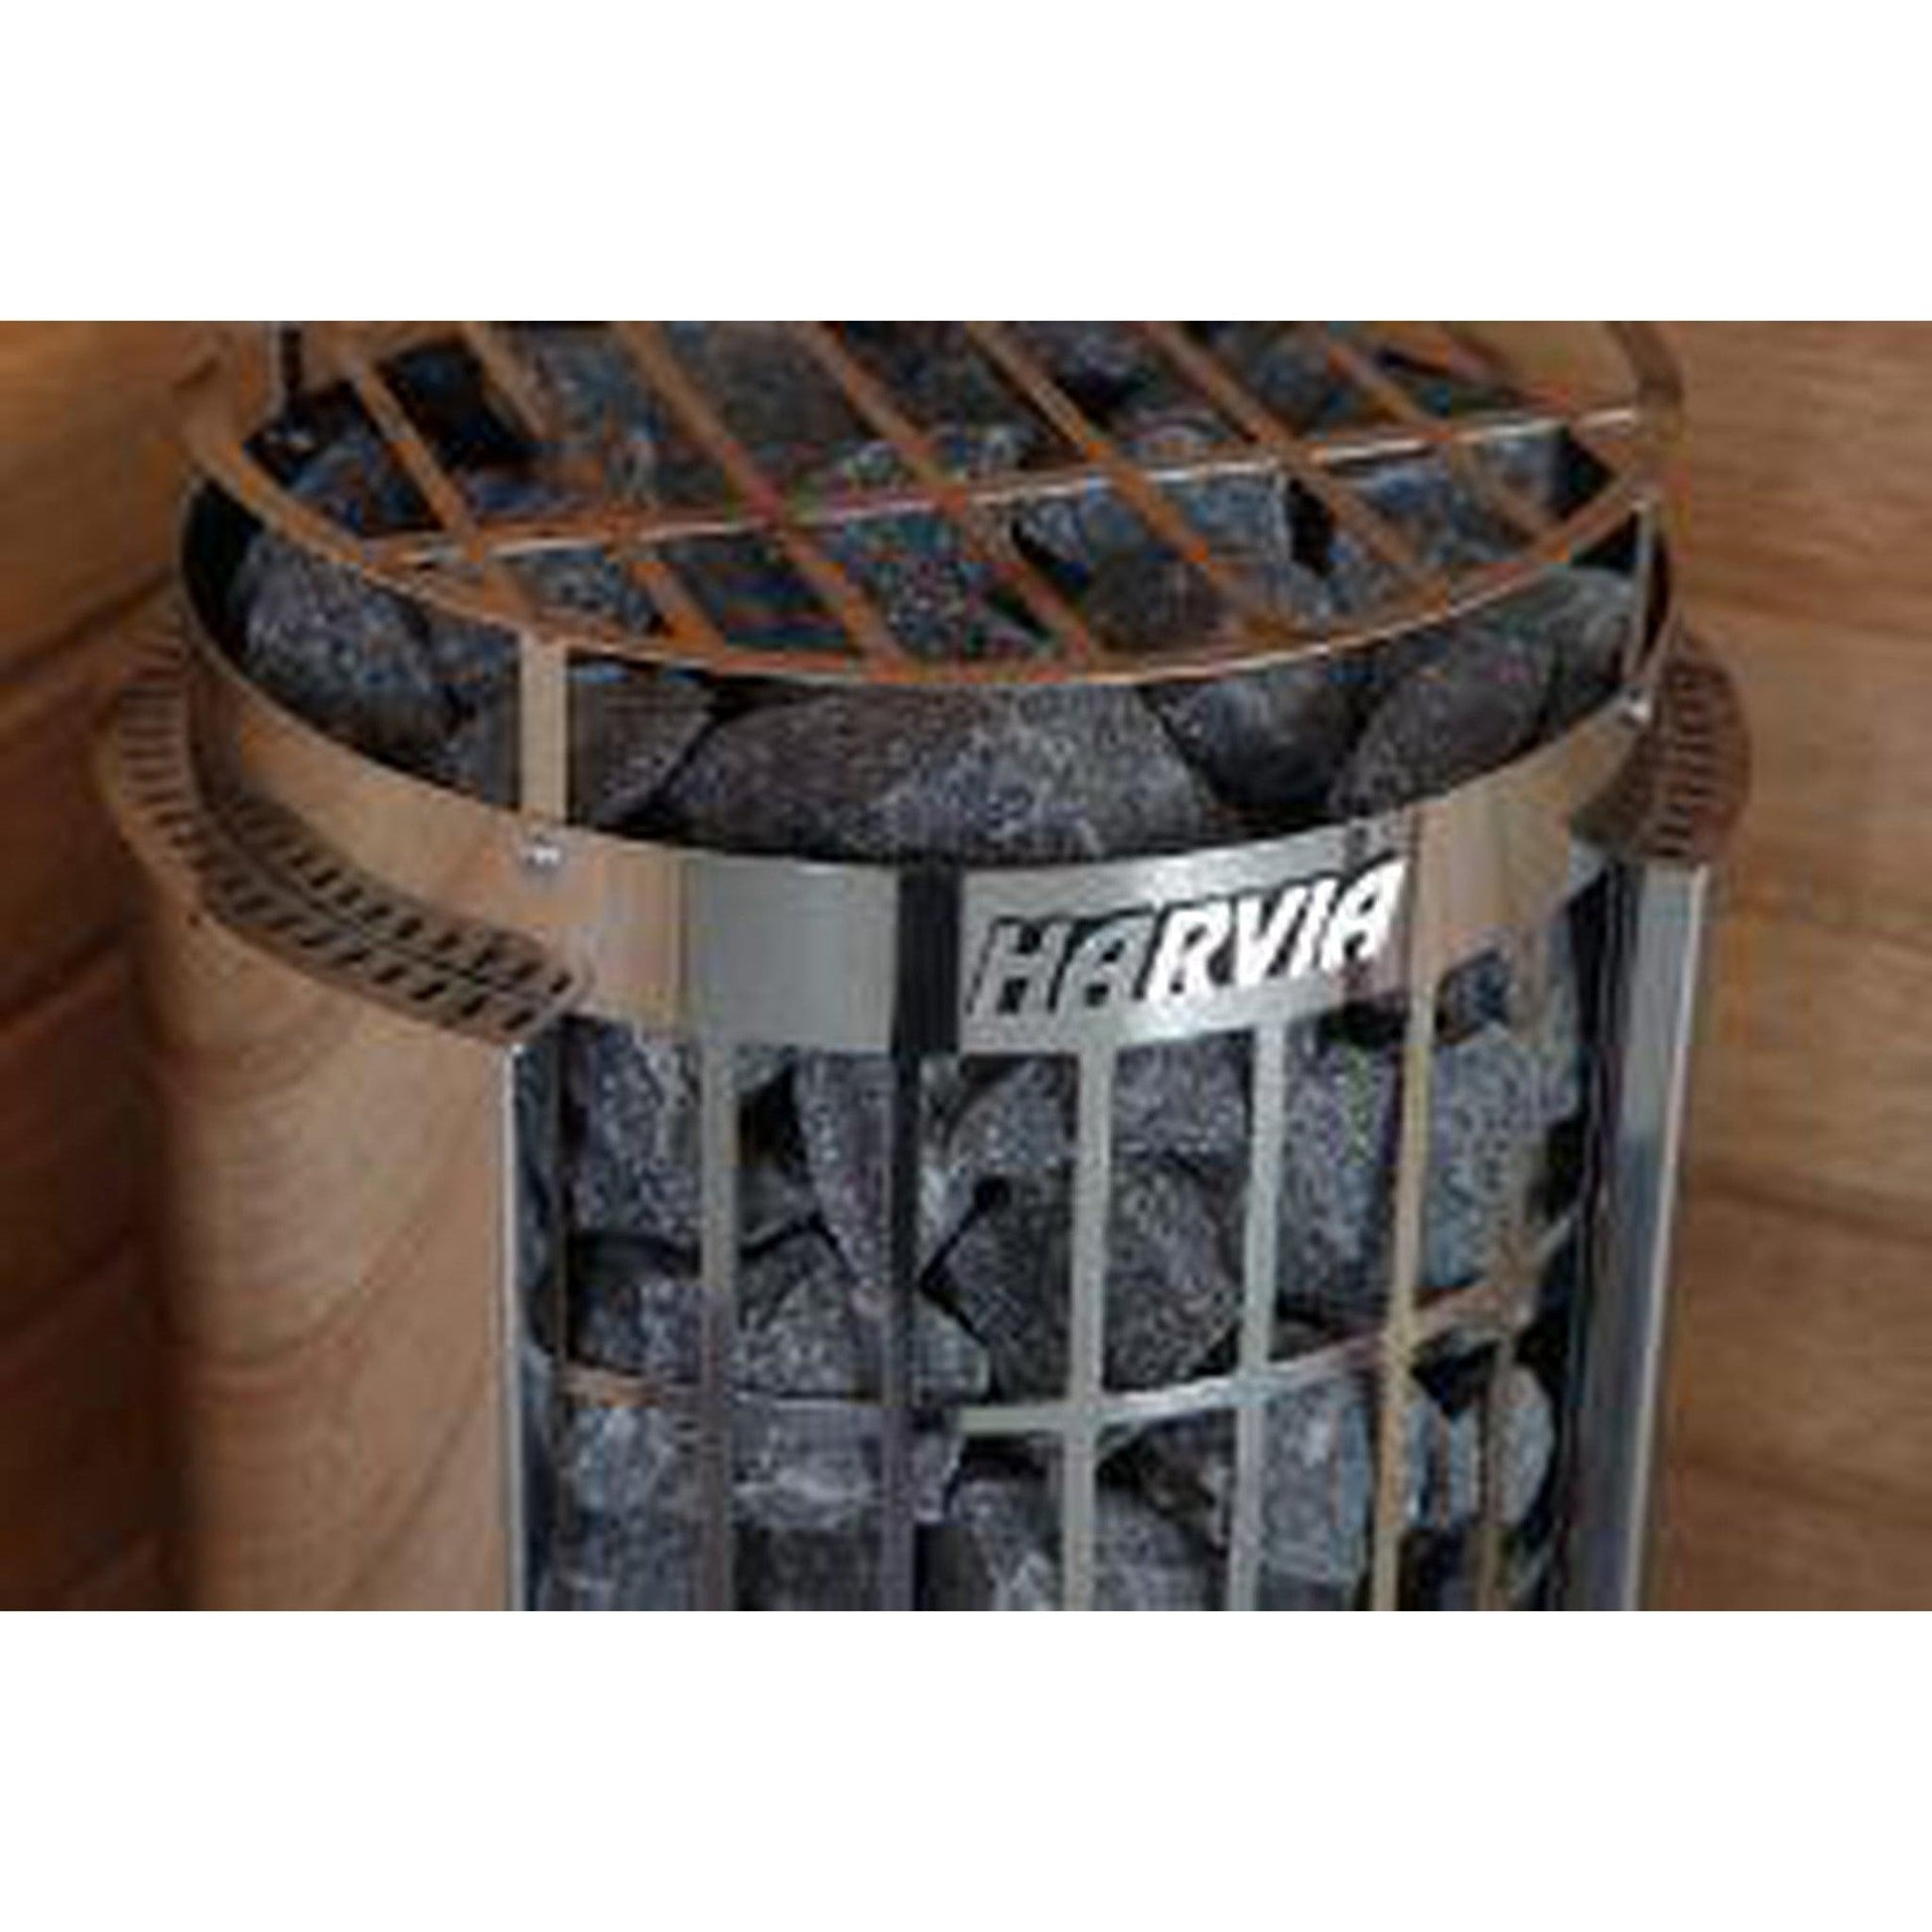 Harvia Cilindro Half Series 9 kW 240V 1 PH Freestanding Stainless Steel Electric Sauna Heater